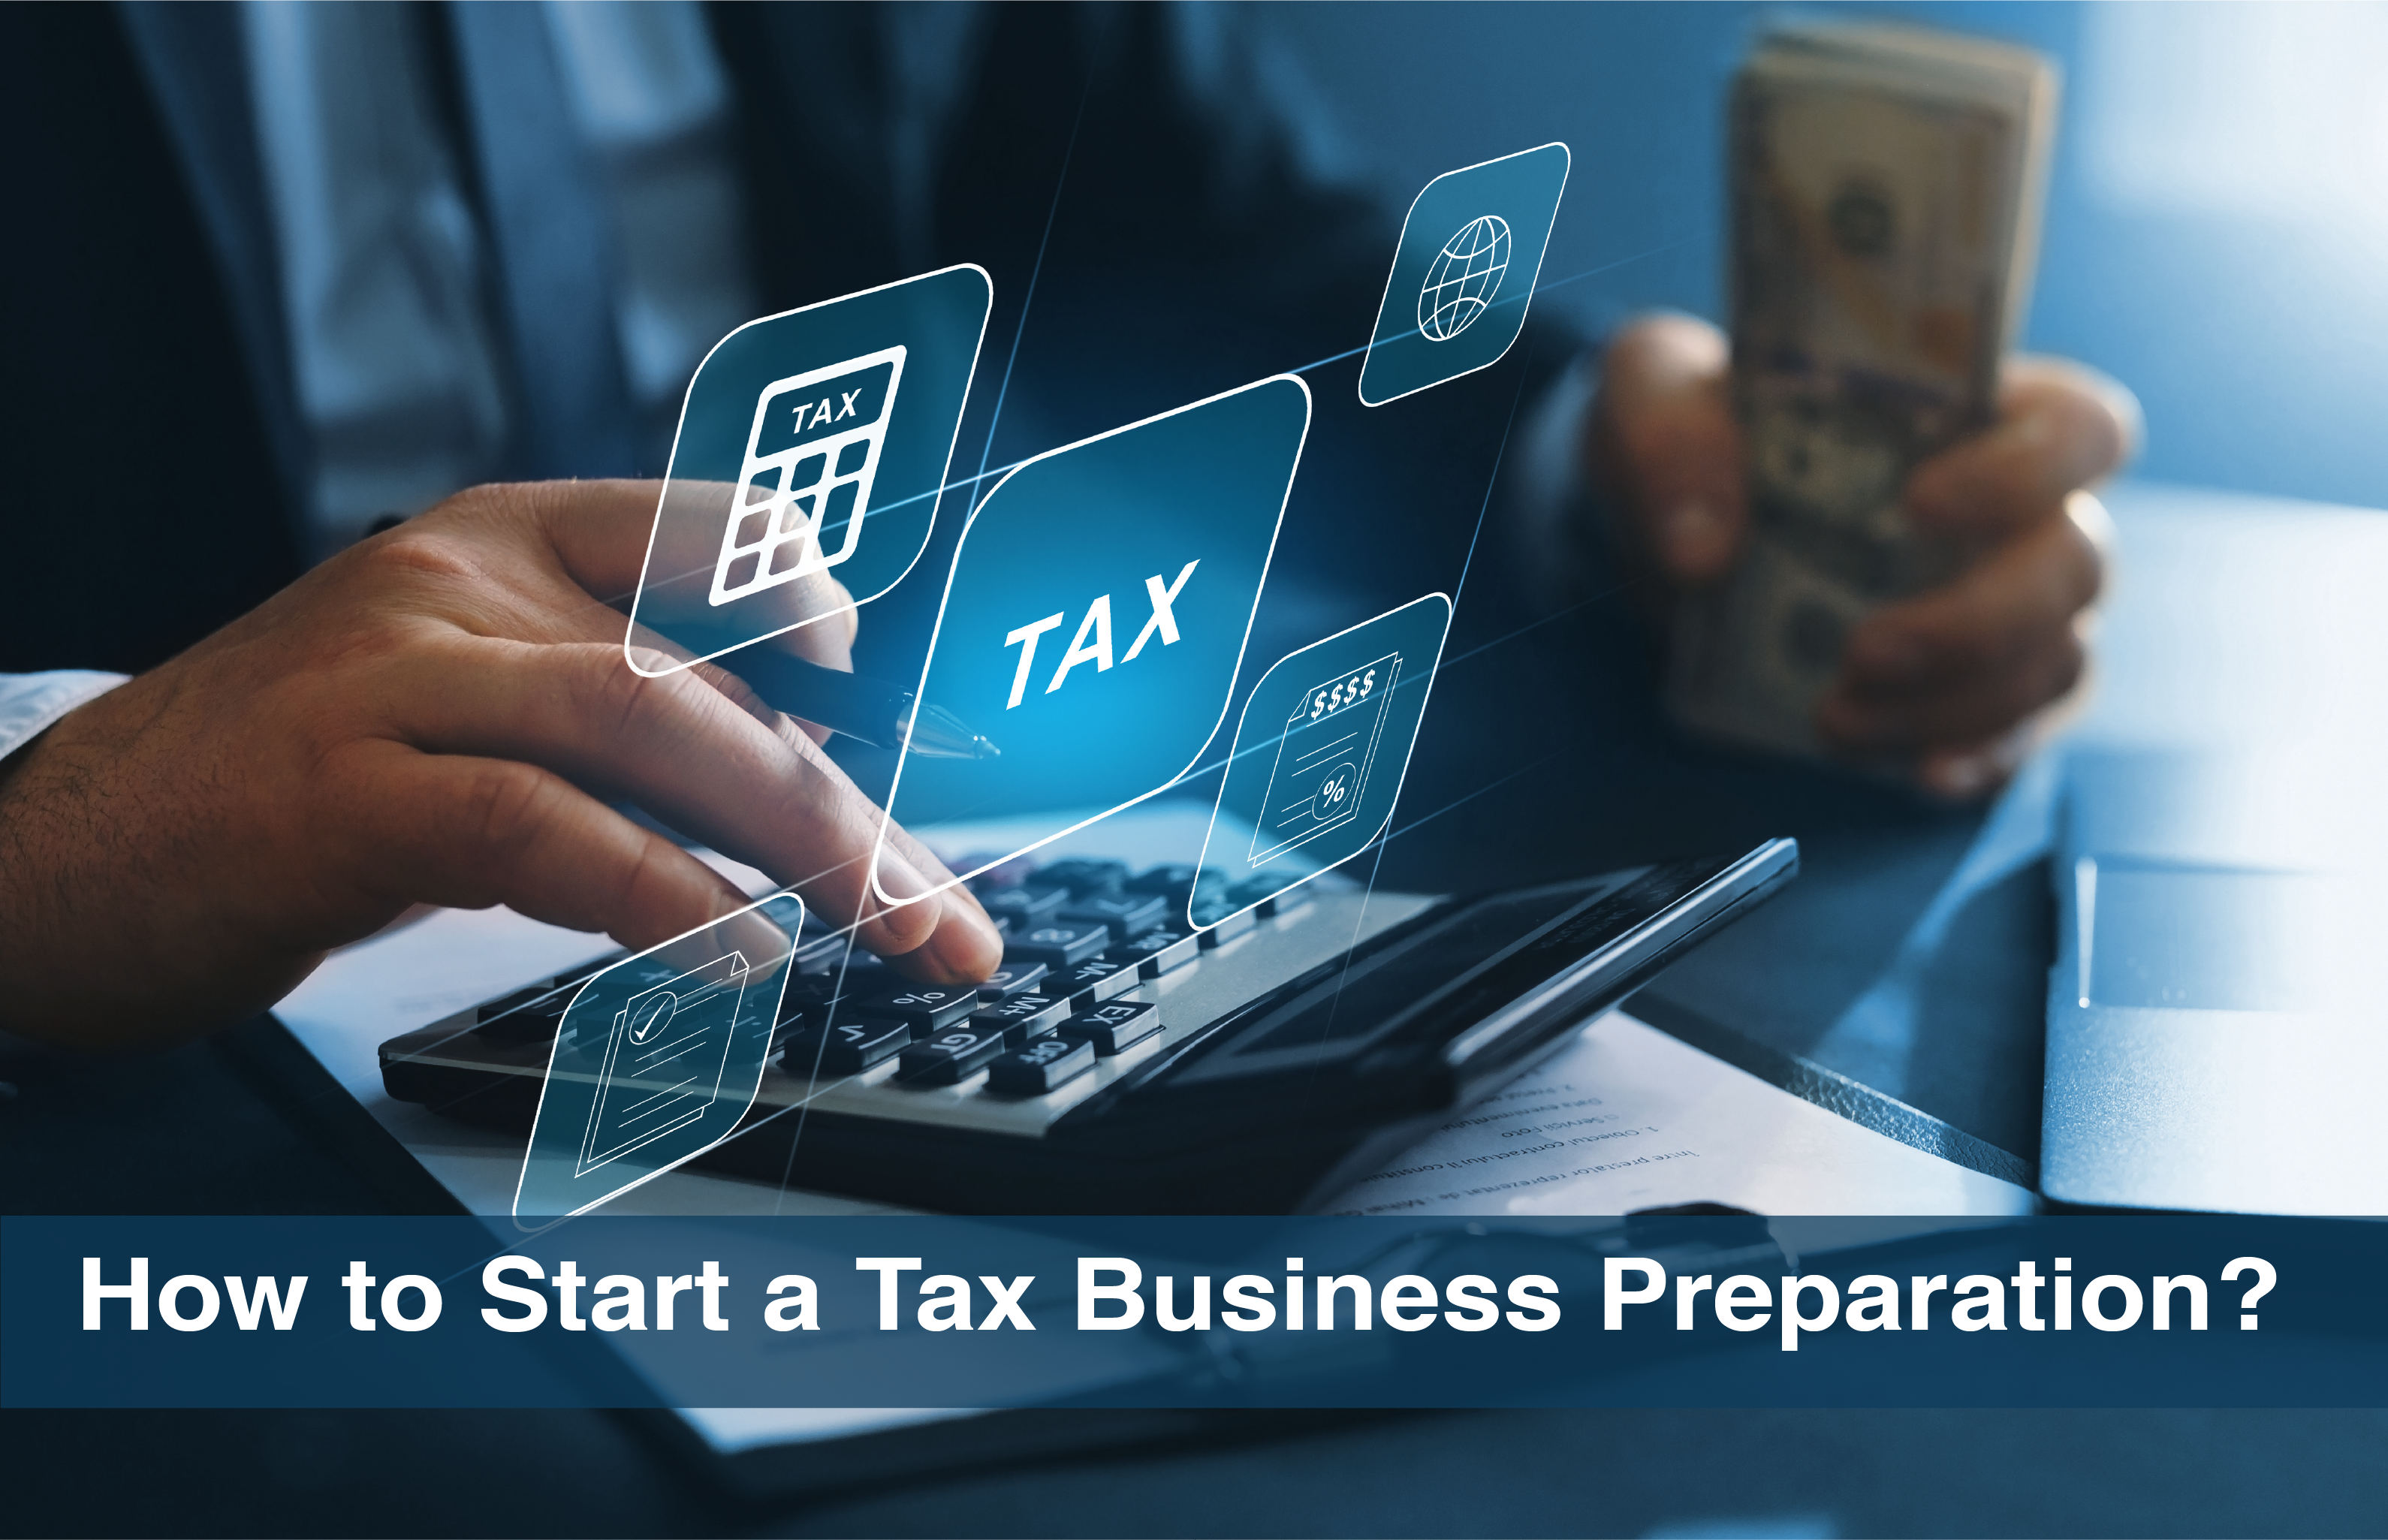 How to Start a Tax Business Preparation